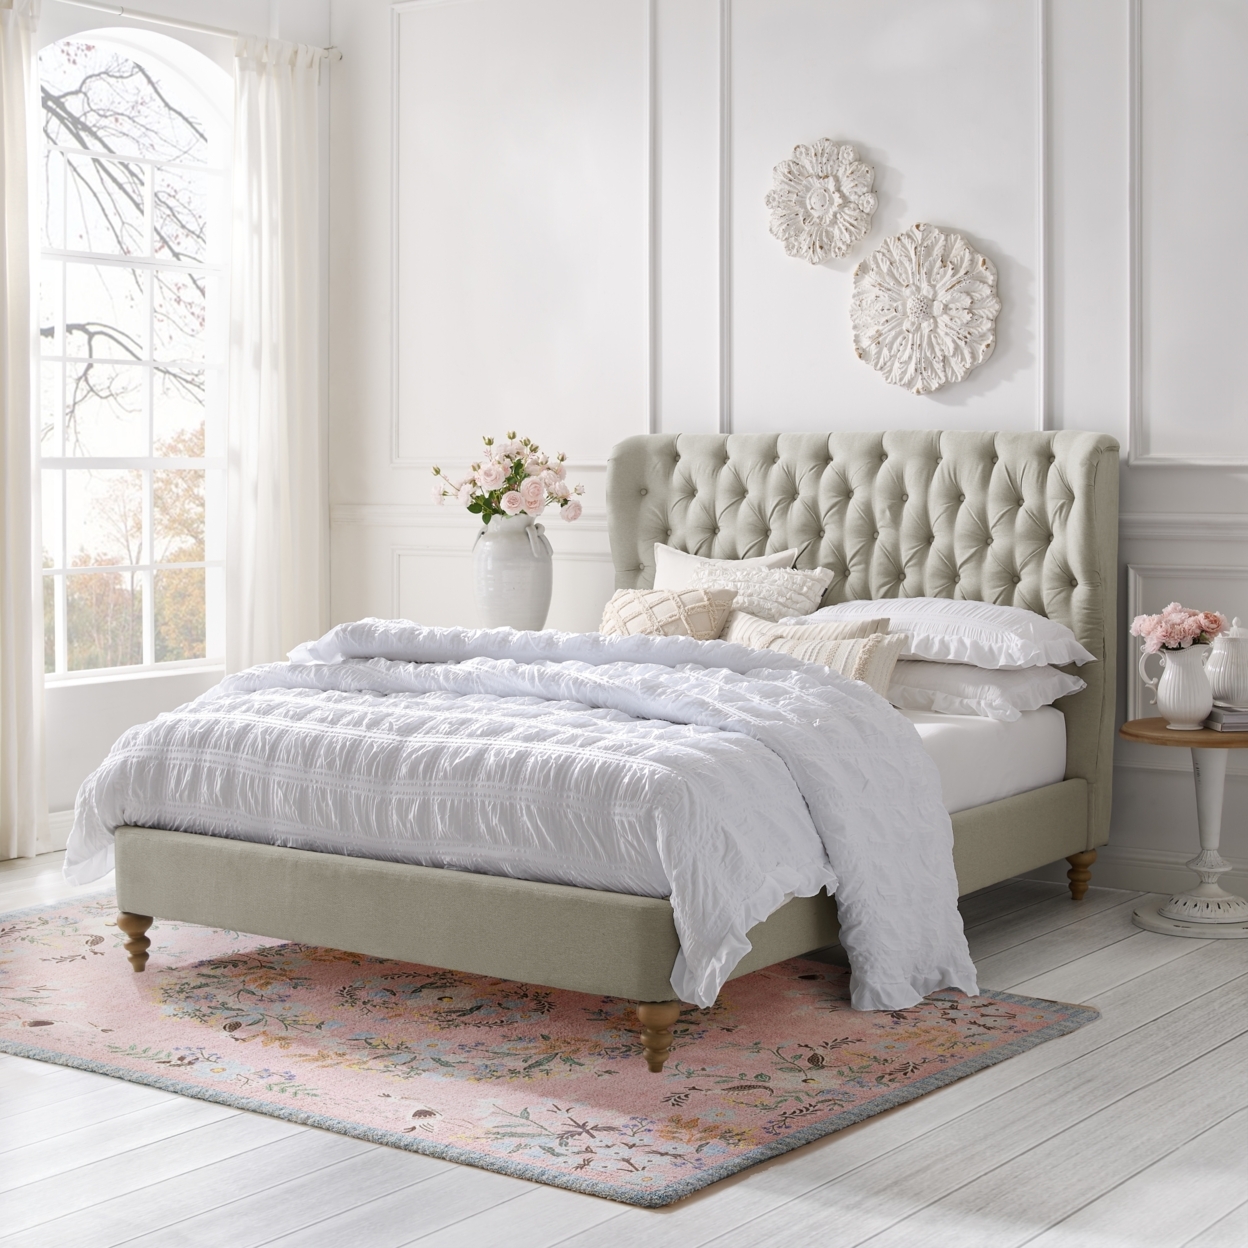 Kelsie Bed-Button Tufted Headboard-Wingback-Slats Included - Cream White, Queen